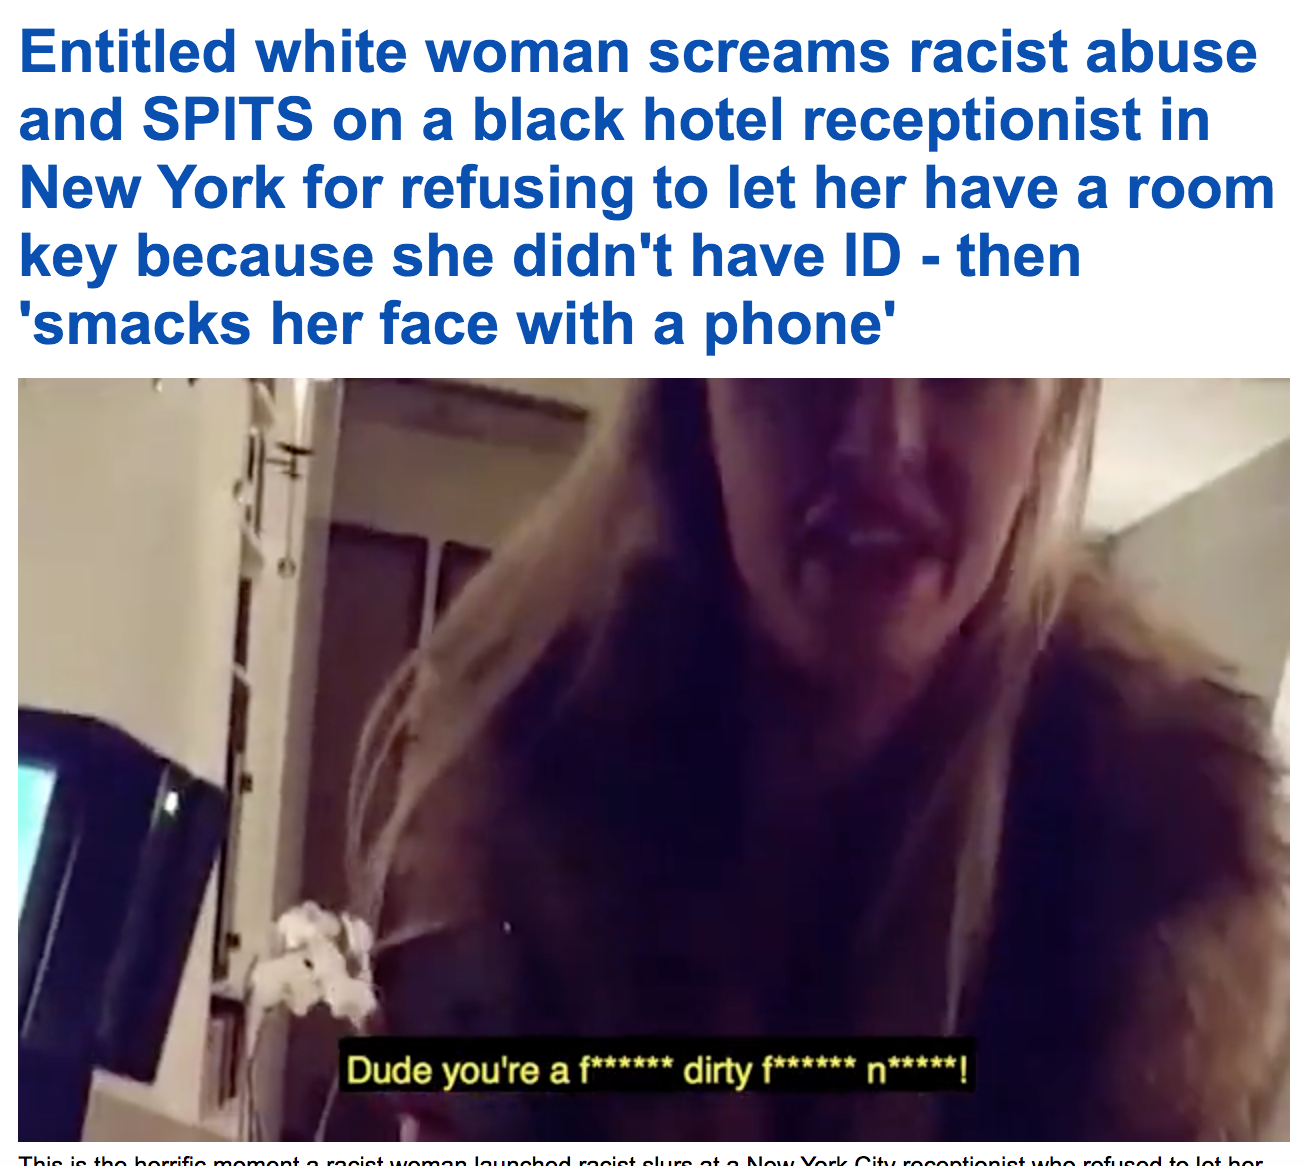 photo caption - Entitled white woman screams racist abuse and Spits on a black hotel receptionist in New York for refusing to let her have a room key because she didn't have Id then 'smacks her face with a phone' Dude you're a f dirty f